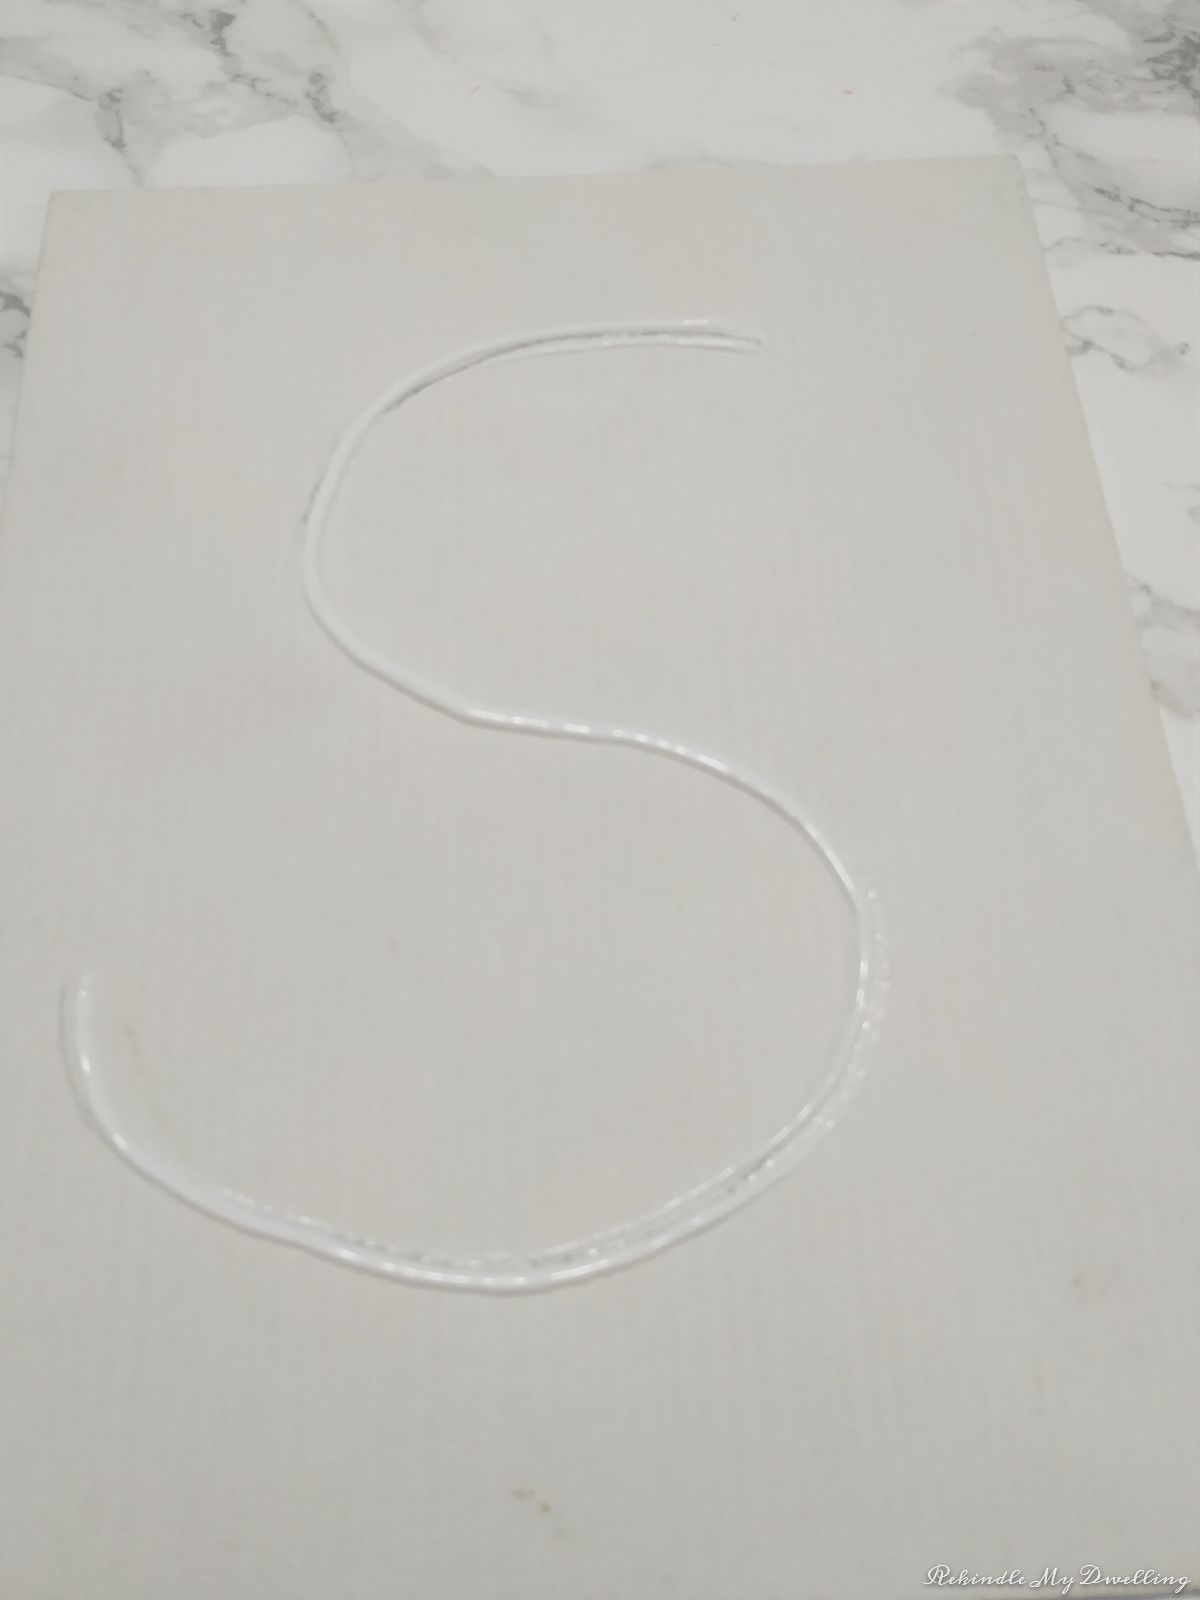 Adding glue to the lines letter S on the canvas.